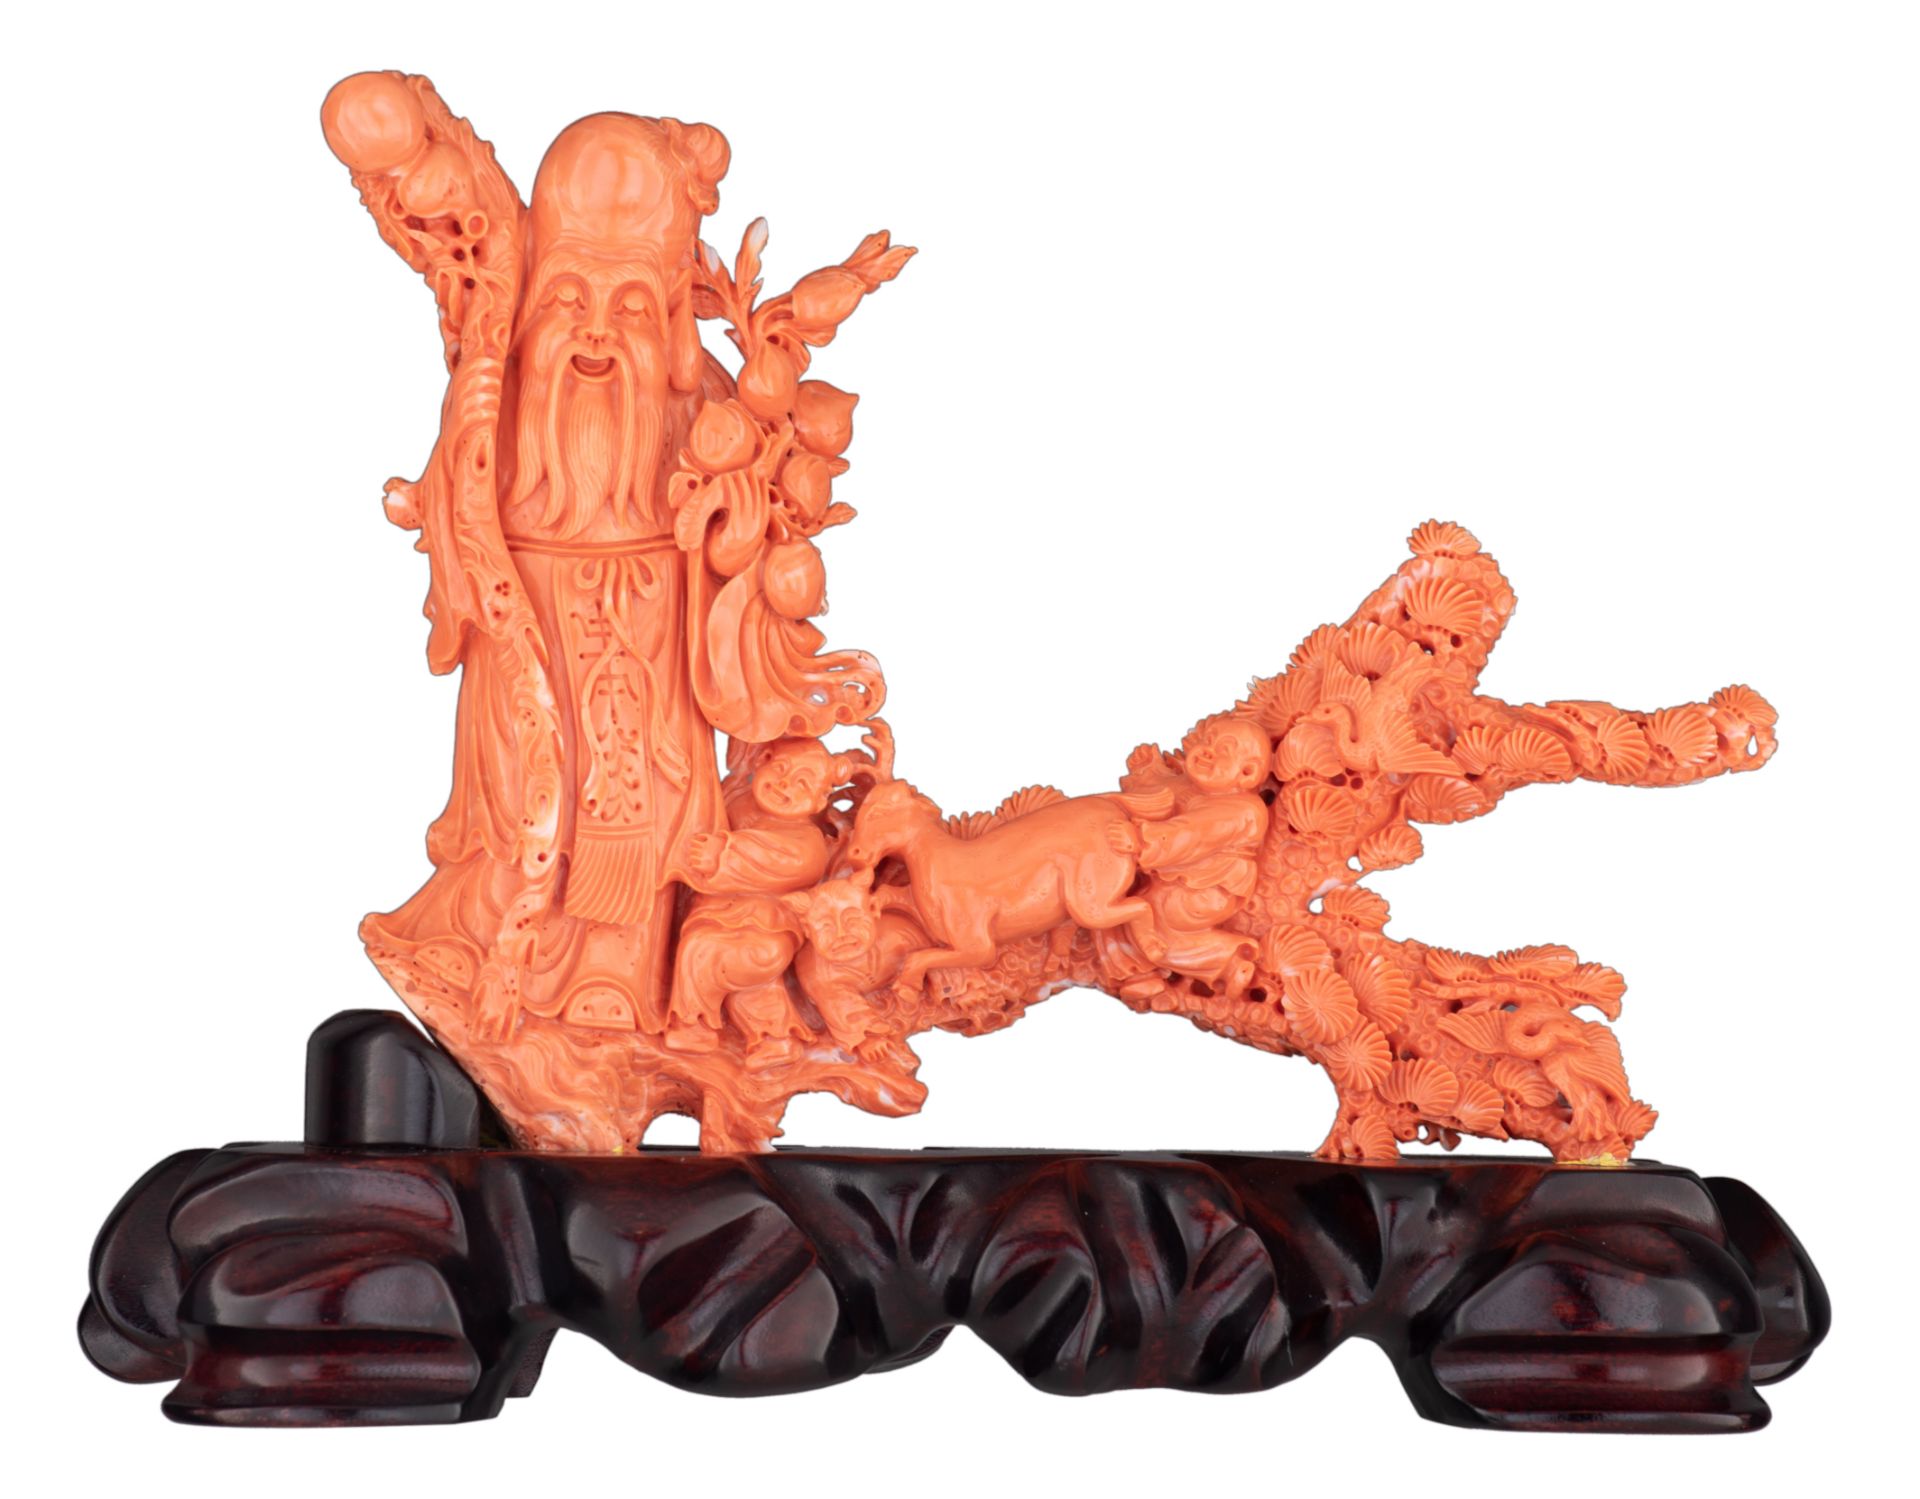 A Chinese sculpted red coral group, around 19thC, H 20,5 cm - Weight coral: about 1,3 kg